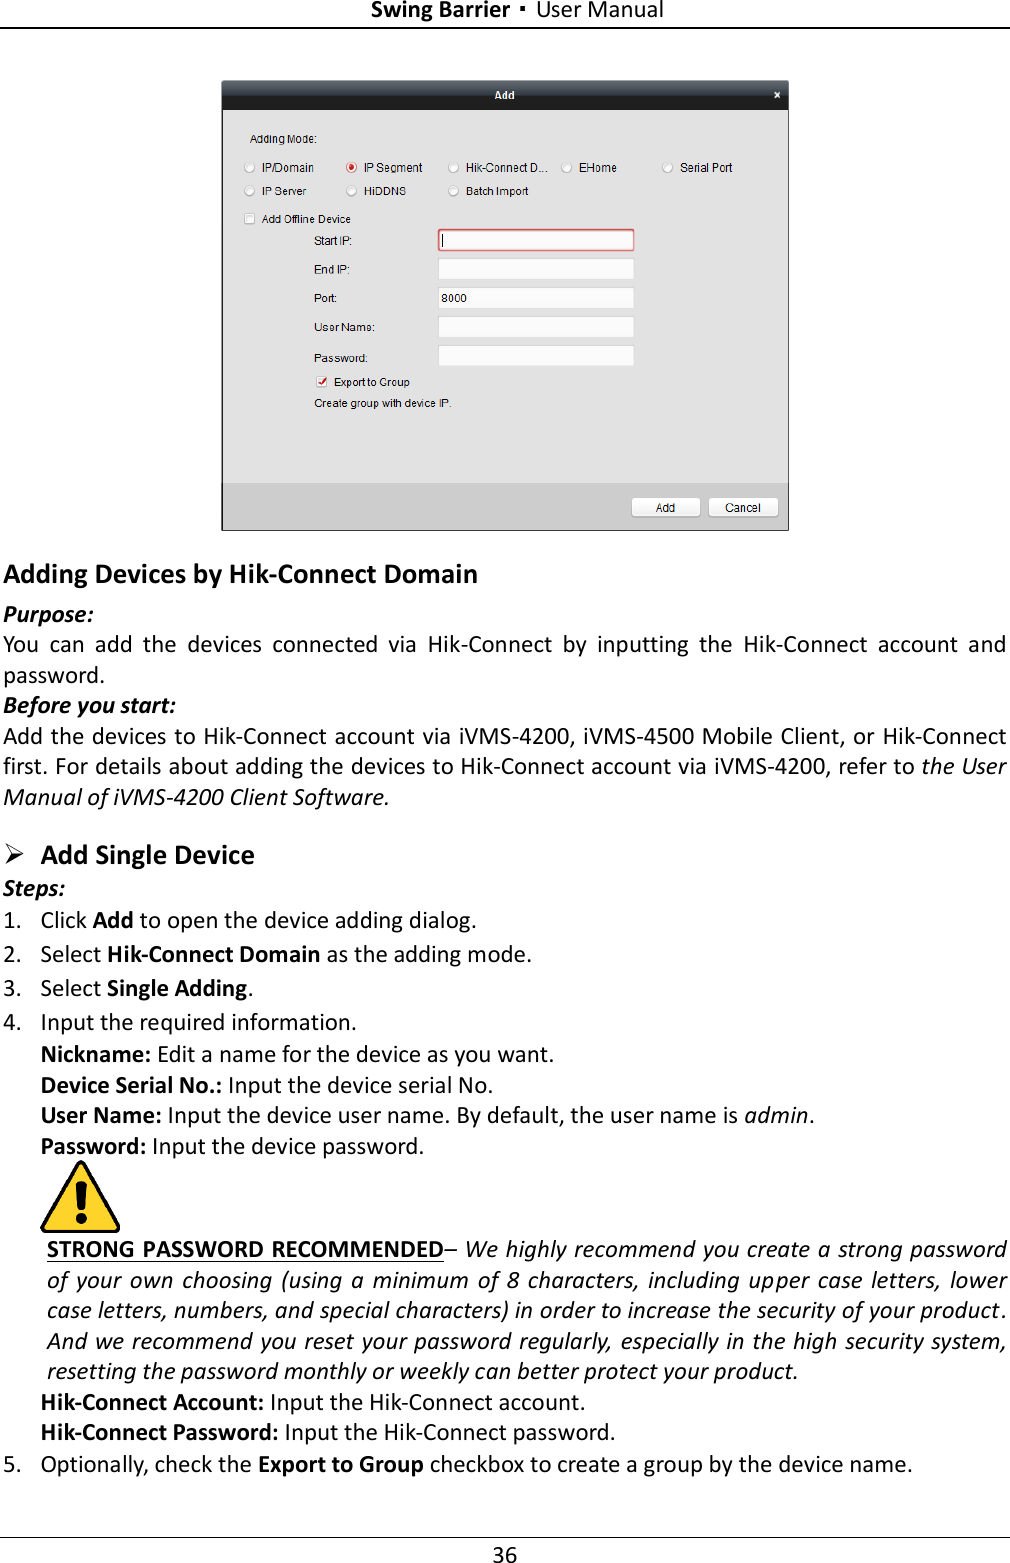 Swing Barrier·User Manual 36   Adding Devices by Hik-Connect Domain Purpose: You  can  add  the  devices  connected  via  Hik-Connect  by  inputting  the  Hik-Connect  account  and password.   Before you start: Add the devices to Hik-Connect account via iVMS-4200, iVMS-4500 Mobile Client, or Hik-Connect first. For details about adding the devices to Hik-Connect account via iVMS-4200, refer to the User Manual of iVMS-4200 Client Software.  Add Single Device Steps: 1. Click Add to open the device adding dialog. 2. Select Hik-Connect Domain as the adding mode. 3. Select Single Adding. 4. Input the required information. Nickname: Edit a name for the device as you want. Device Serial No.: Input the device serial No. User Name: Input the device user name. By default, the user name is admin. Password: Input the device password.  STRONG PASSWORD RECOMMENDED– We highly recommend you create a strong password of  your own  choosing  (using a  minimum  of 8  characters, including  upper  case  letters,  lower case letters, numbers, and special characters) in order to increase the security of your product. And we recommend you reset your password regularly, especially in the high security system, resetting the password monthly or weekly can better protect your product. Hik-Connect Account: Input the Hik-Connect account. Hik-Connect Password: Input the Hik-Connect password. 5. Optionally, check the Export to Group checkbox to create a group by the device name.   